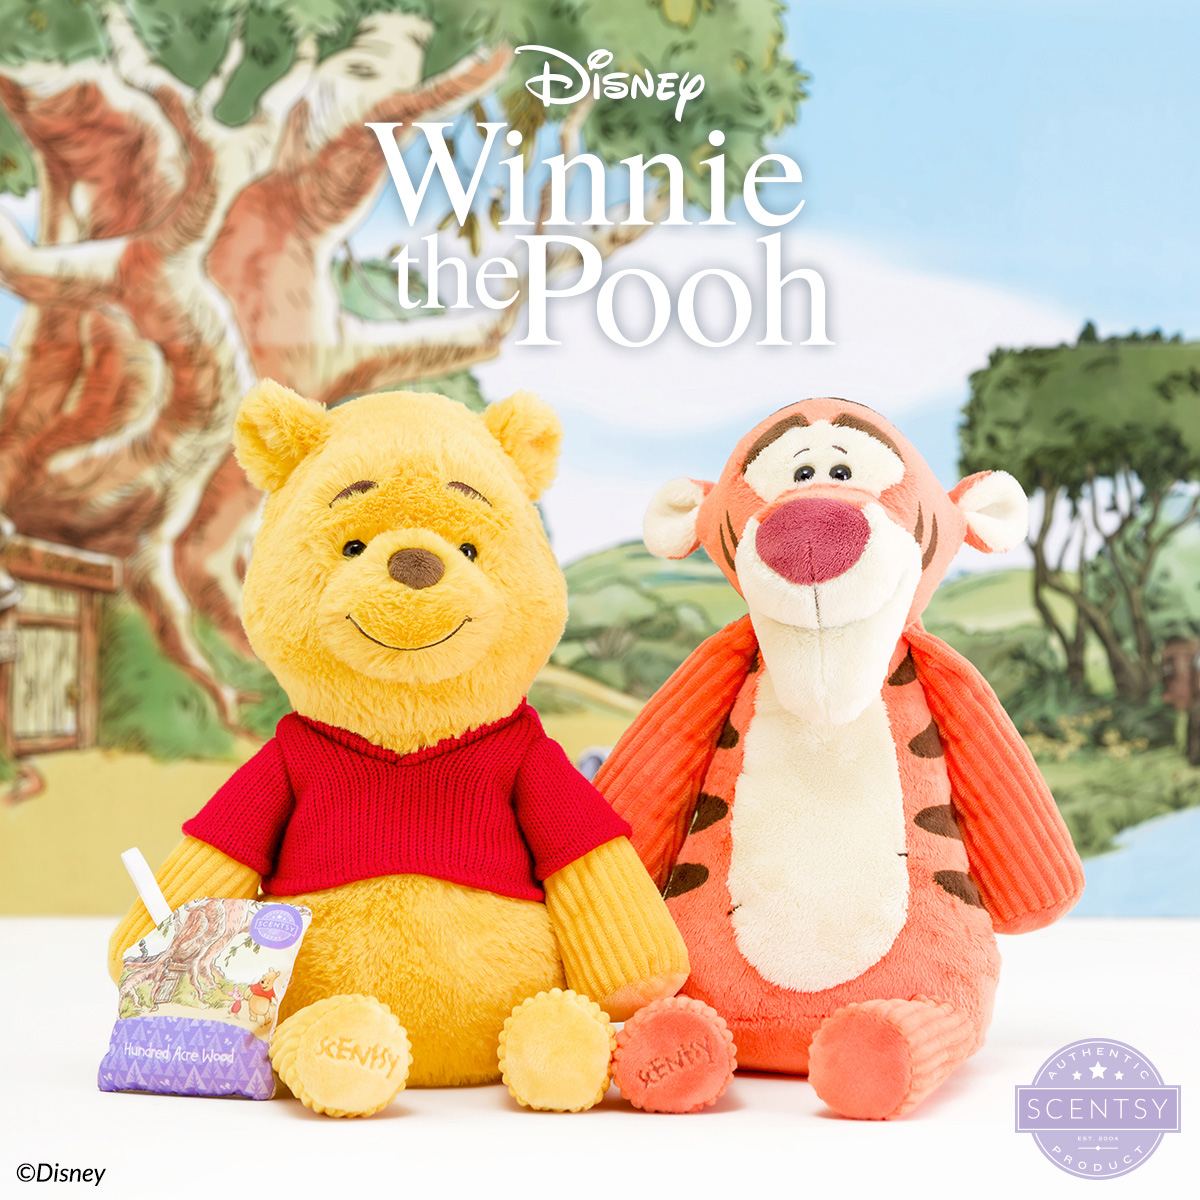 Hundred Acre Wood – Scentsy Scent Pak and Winnie the Pooh and Tigger – Scentsy Buddies